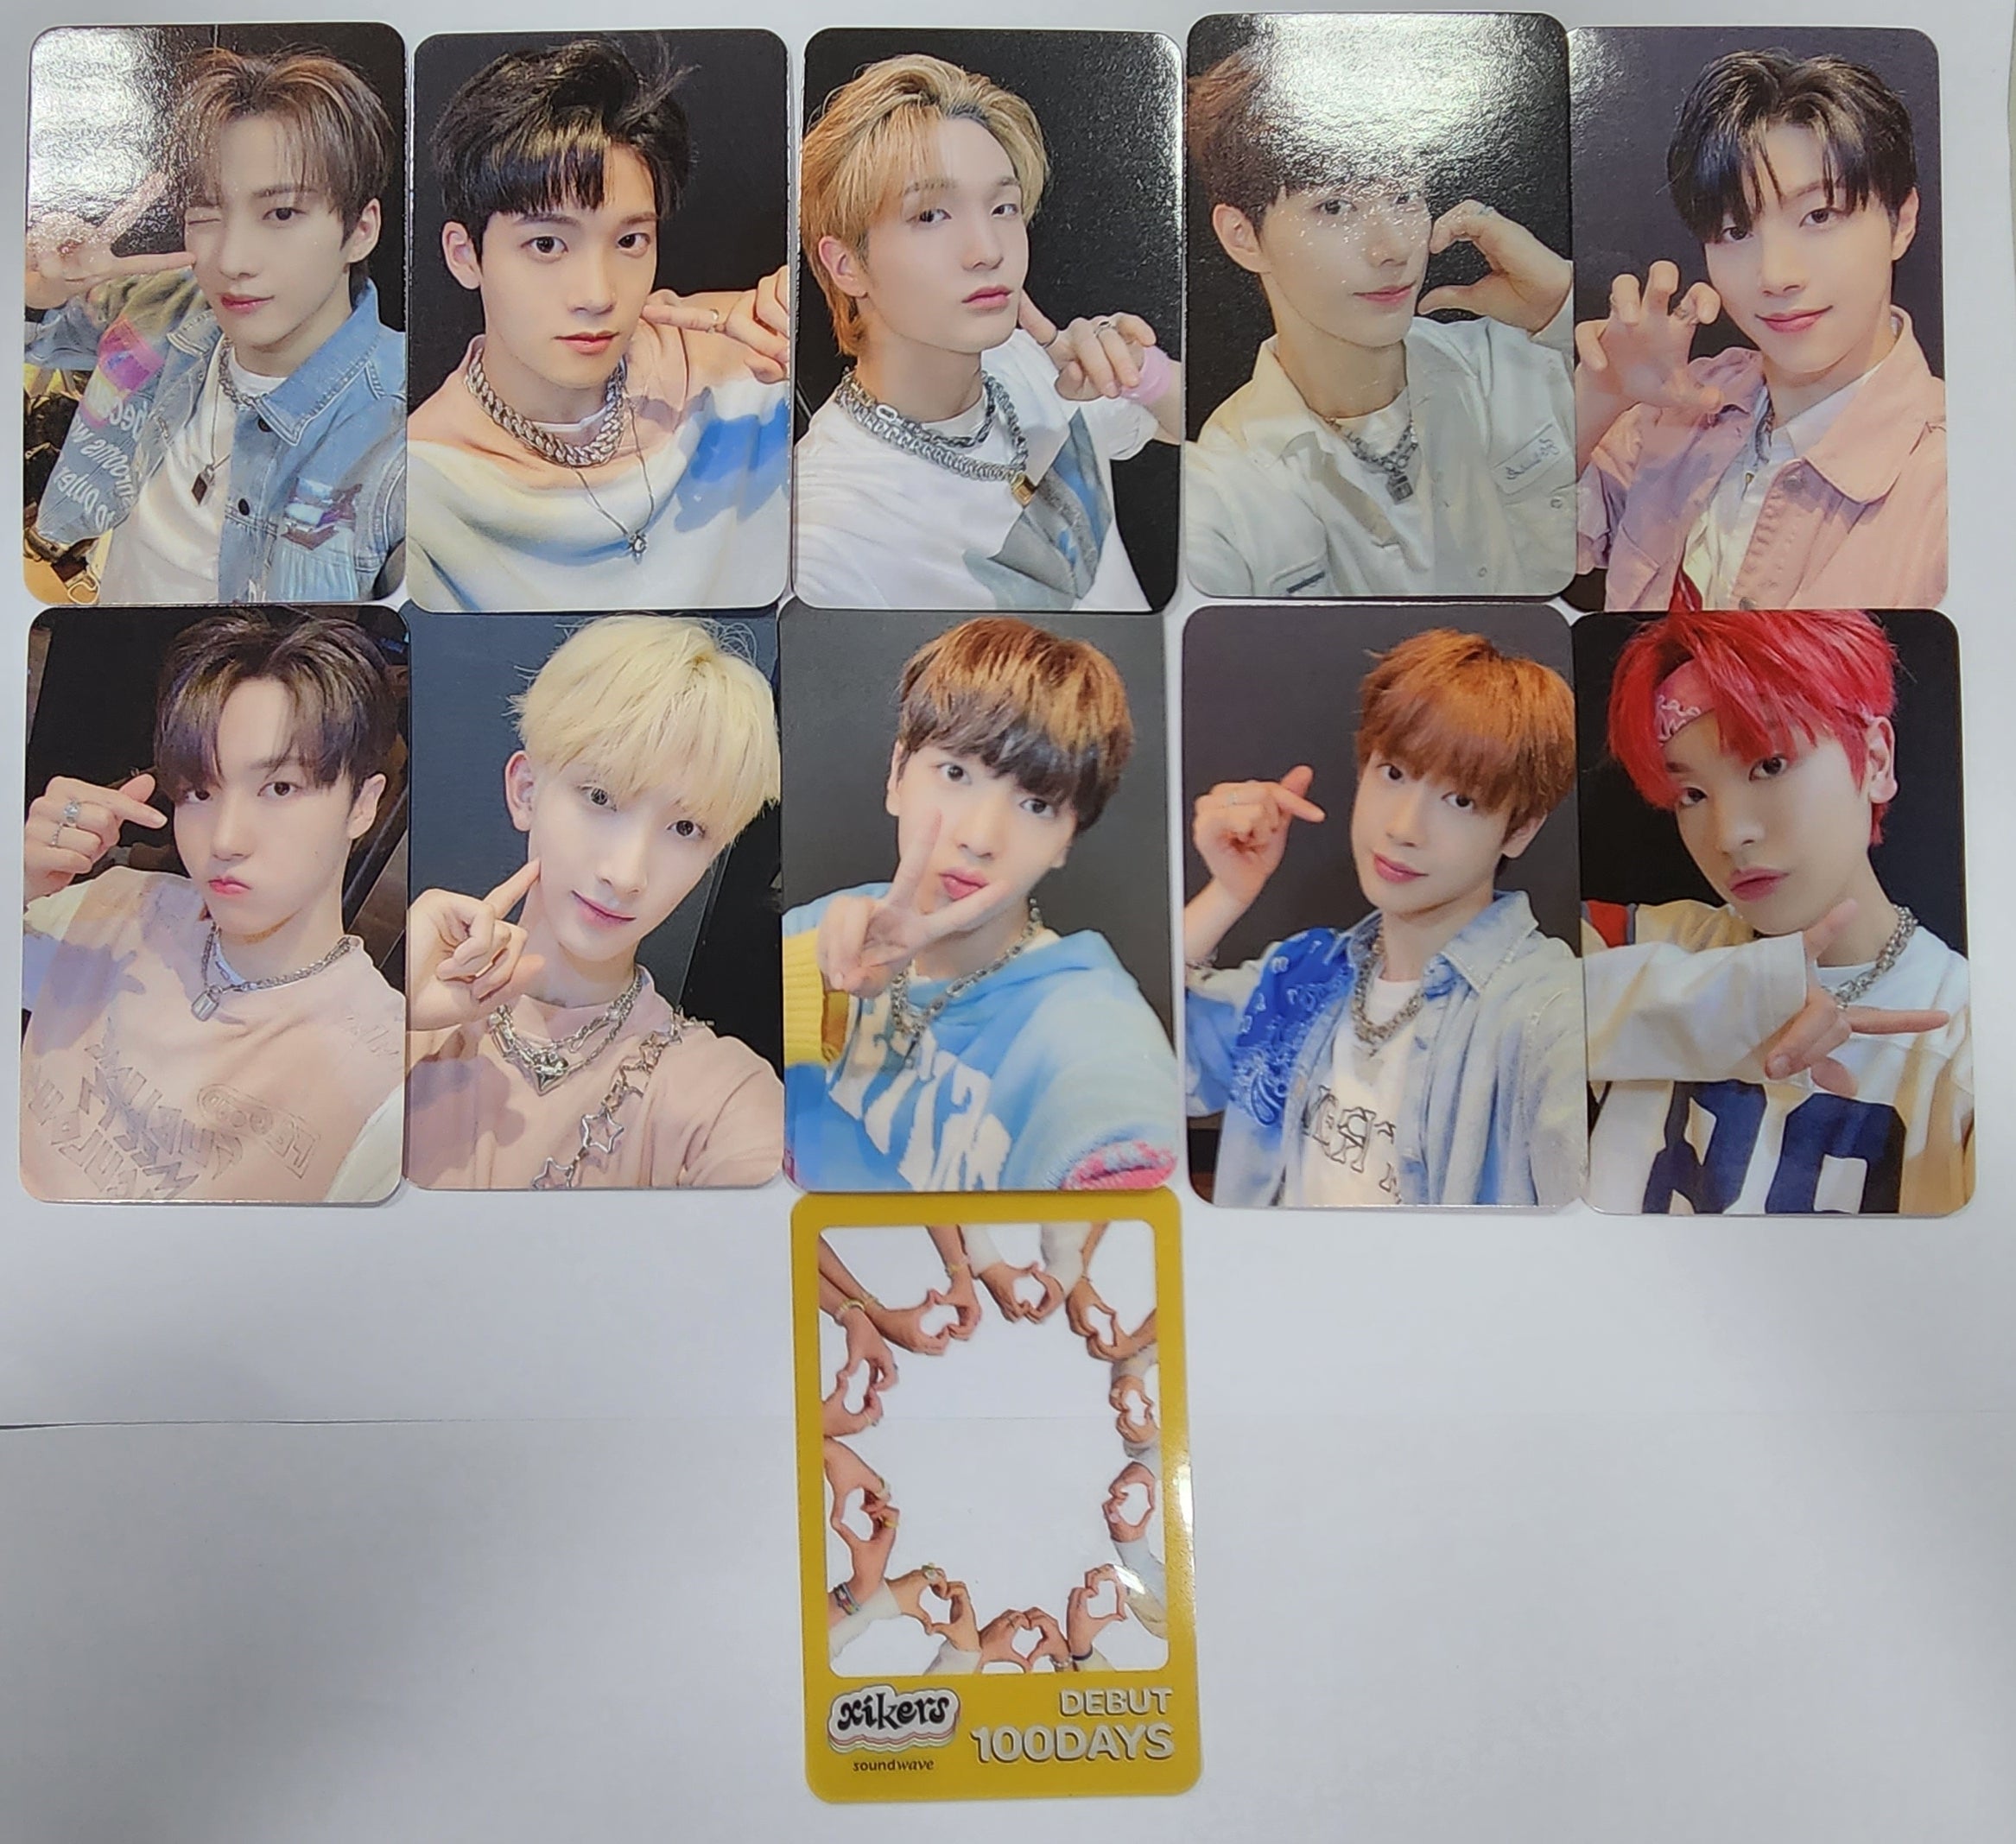 Xikers DEBUT 100DAYS - Soundwave Special Gift Event Photocards 